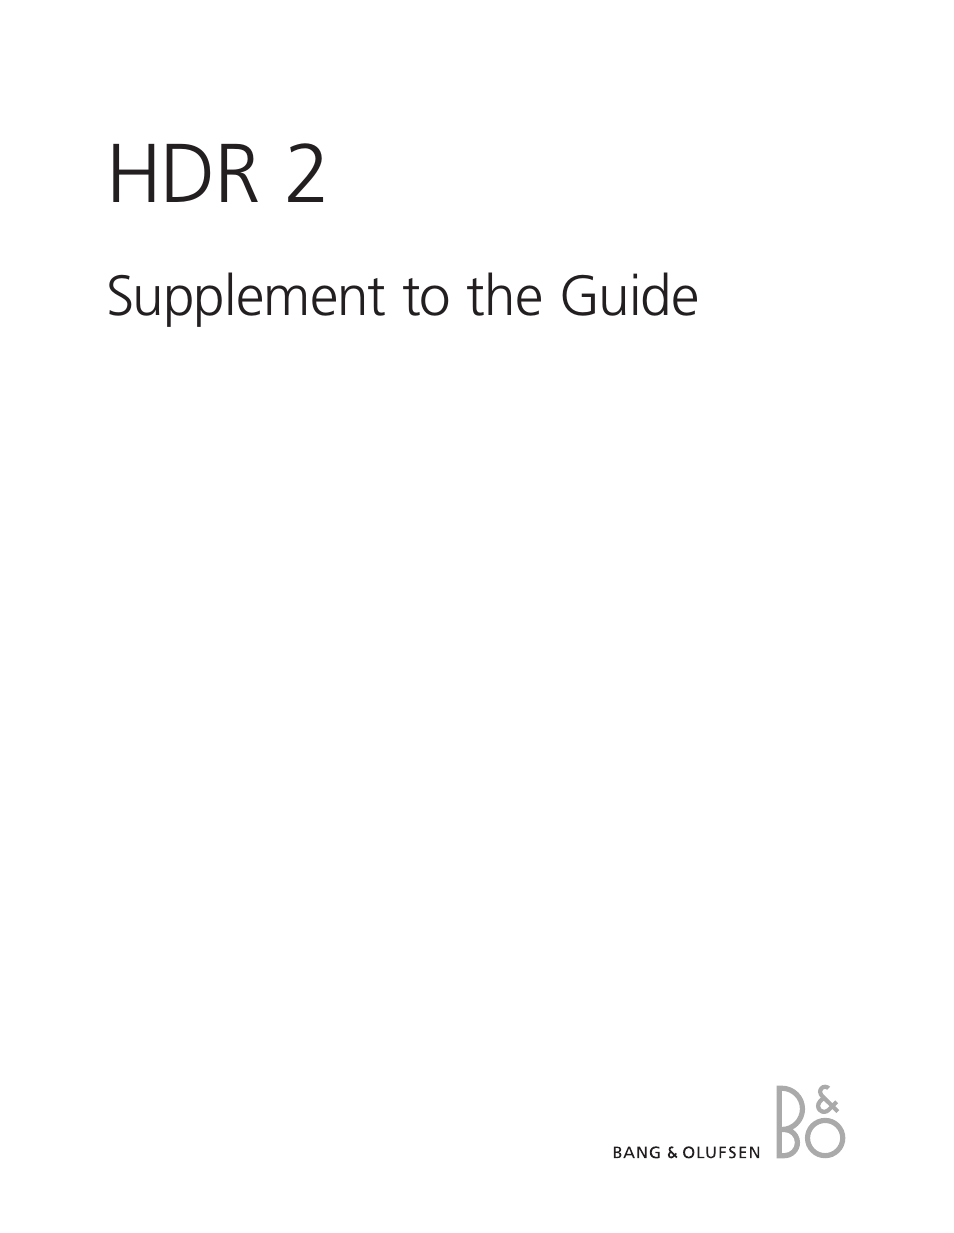 HDR 2 - Supplement to User Guide